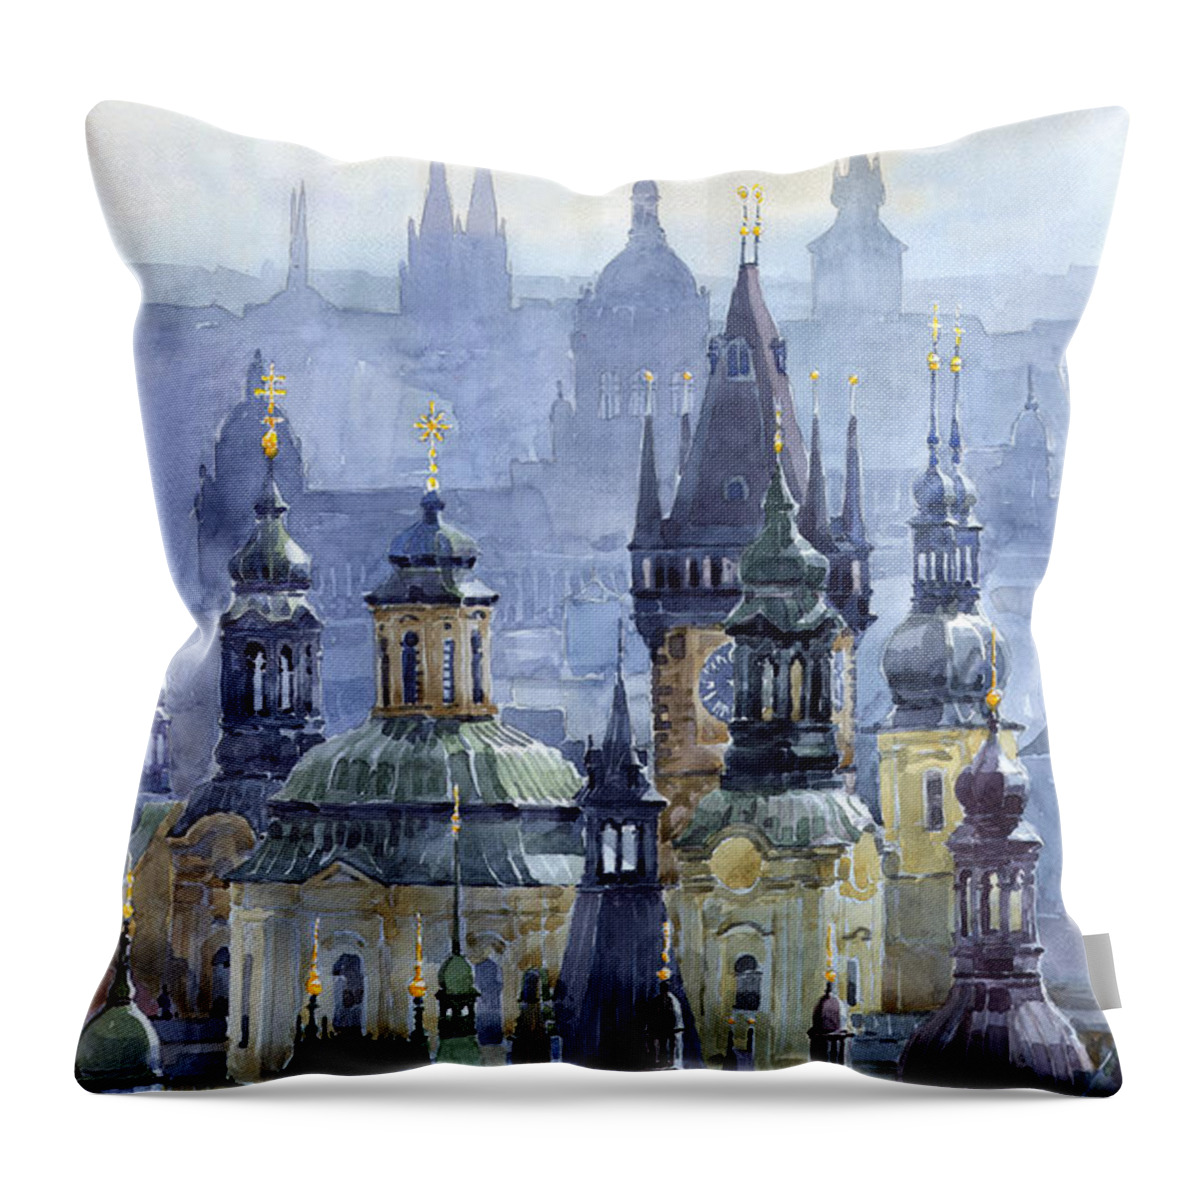 Architecture Throw Pillow featuring the painting Prague Towers by Yuriy Shevchuk